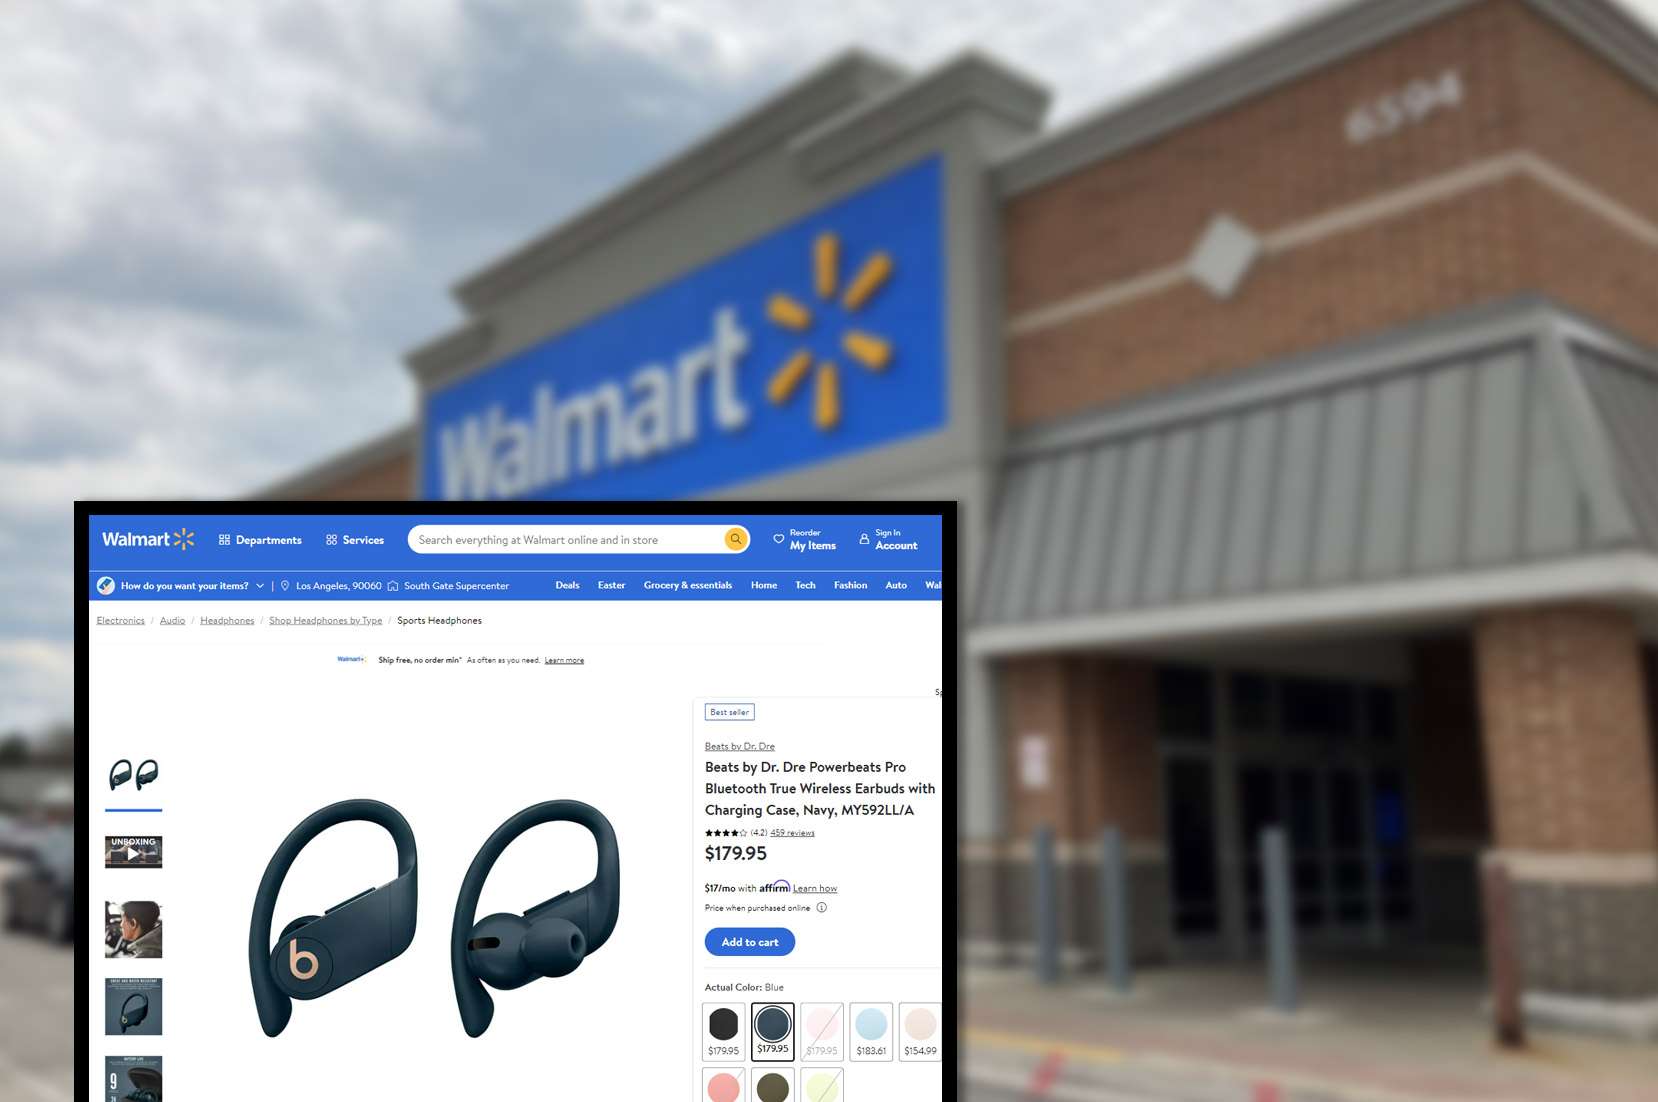 walmart-comproduct-pricing-information-and-image-scraping-services